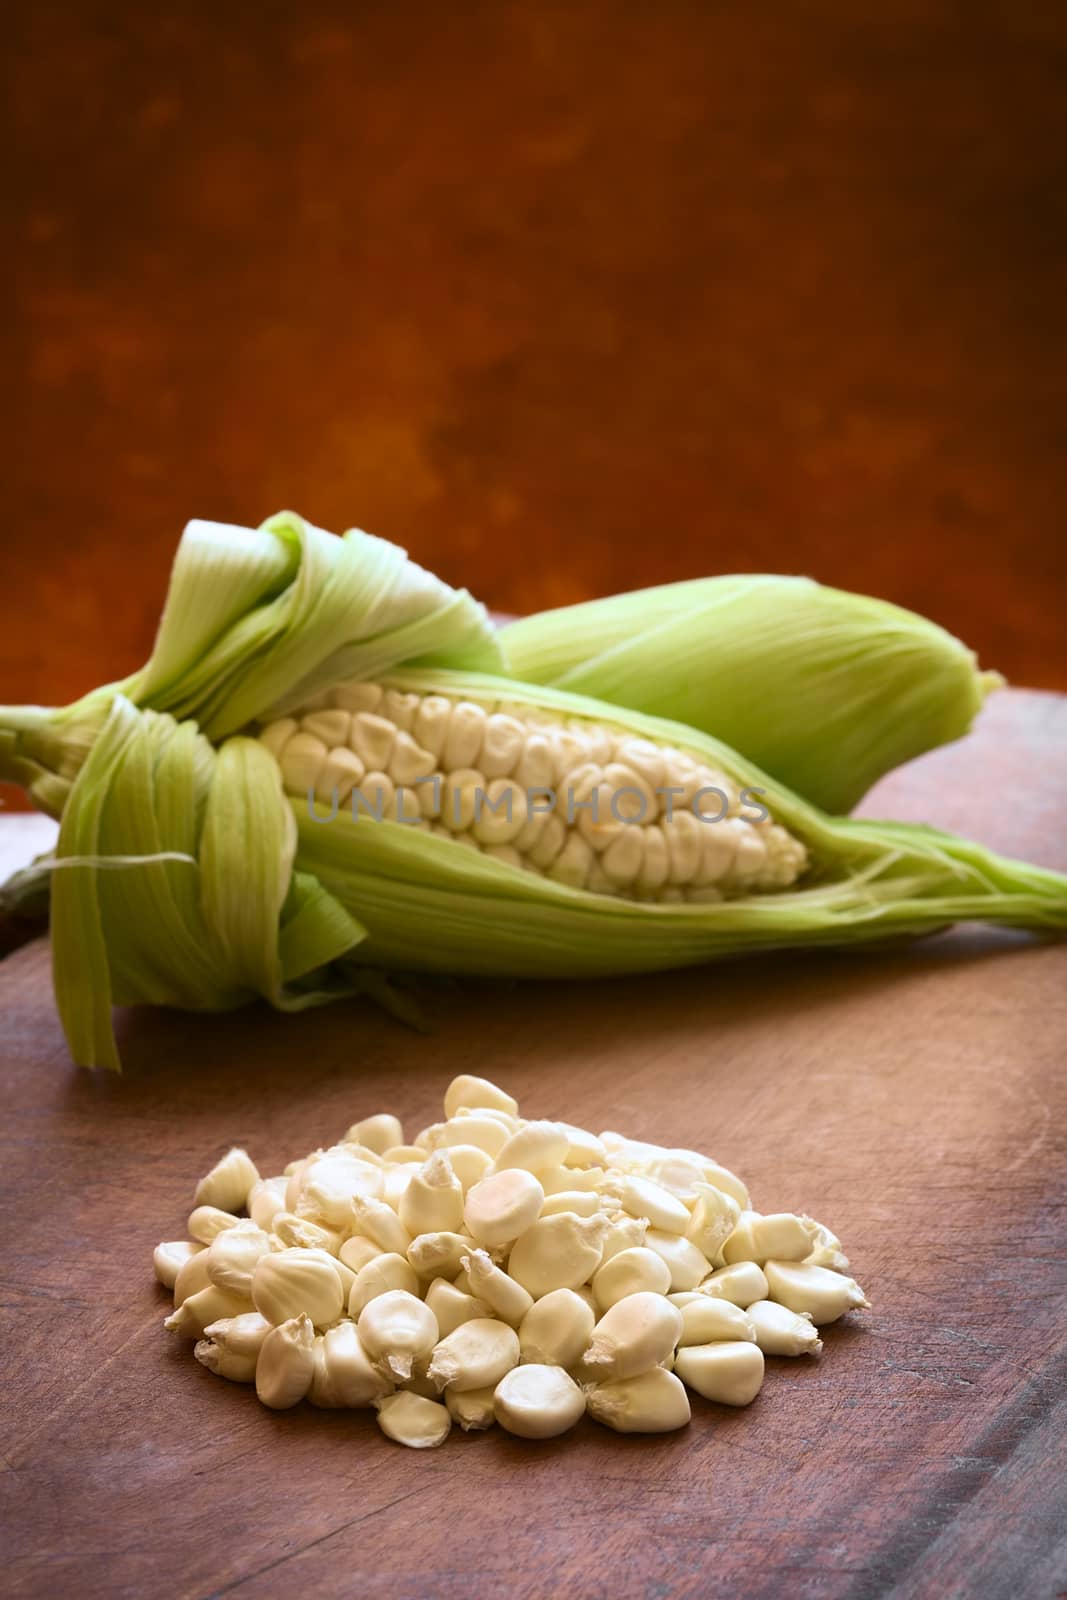 Kernels of white corn called Choclo (Spanish), in English Peruvian or Cuzco corn, typically found in Peru and Bolivia, photographed on wooden board with natural light (Selective Focus, Focus one third into the kernels)     